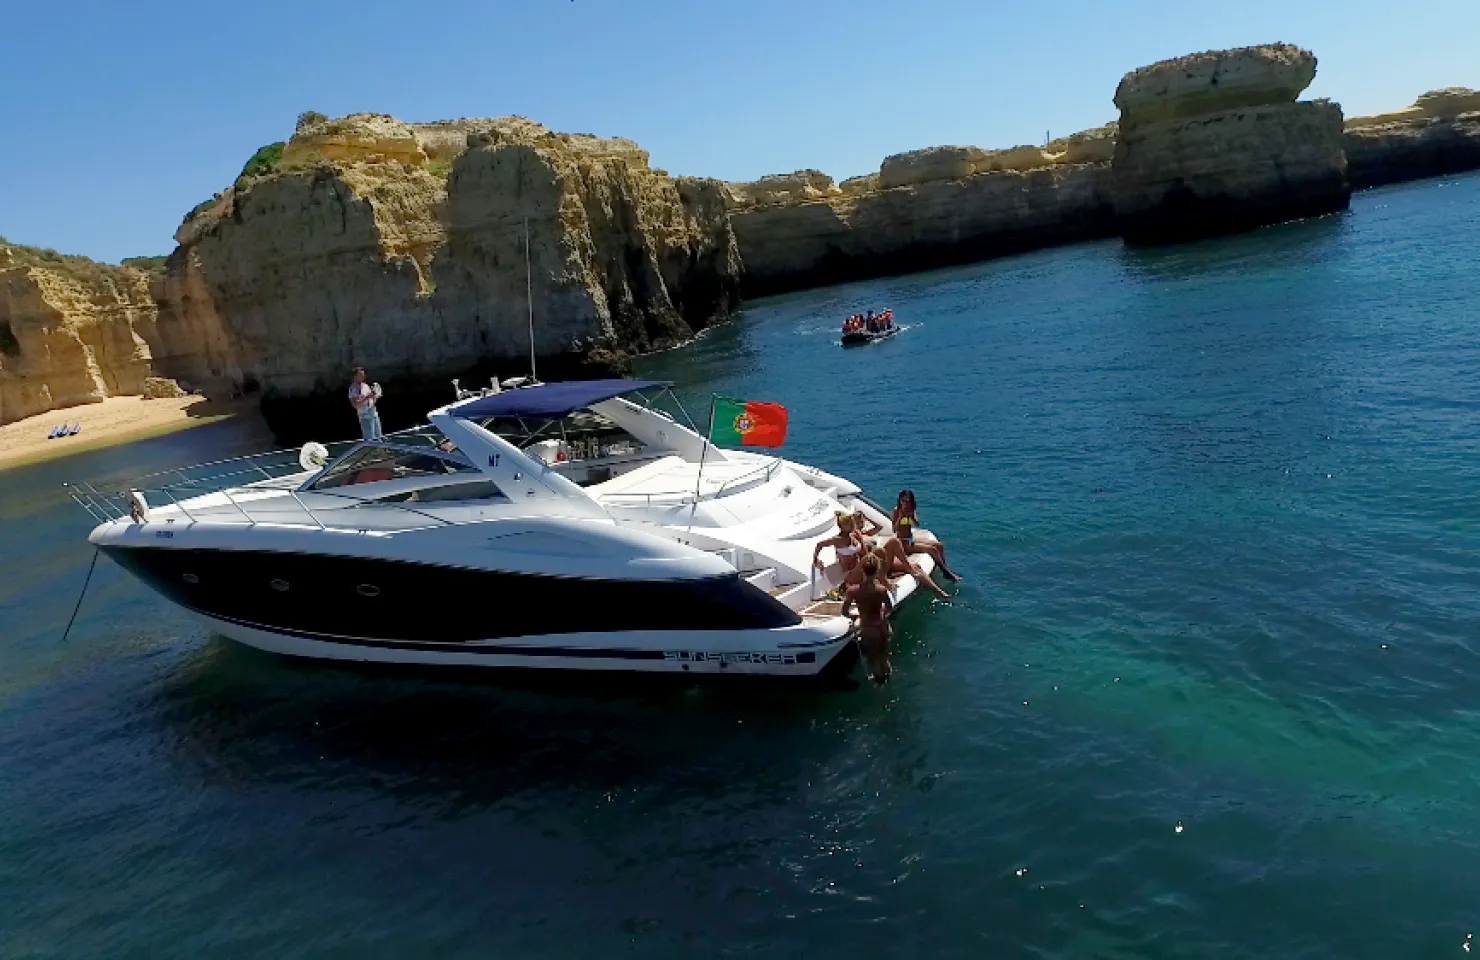 Afternoon Luxury Cruise - VILAMOURA YACHT CHARTERS